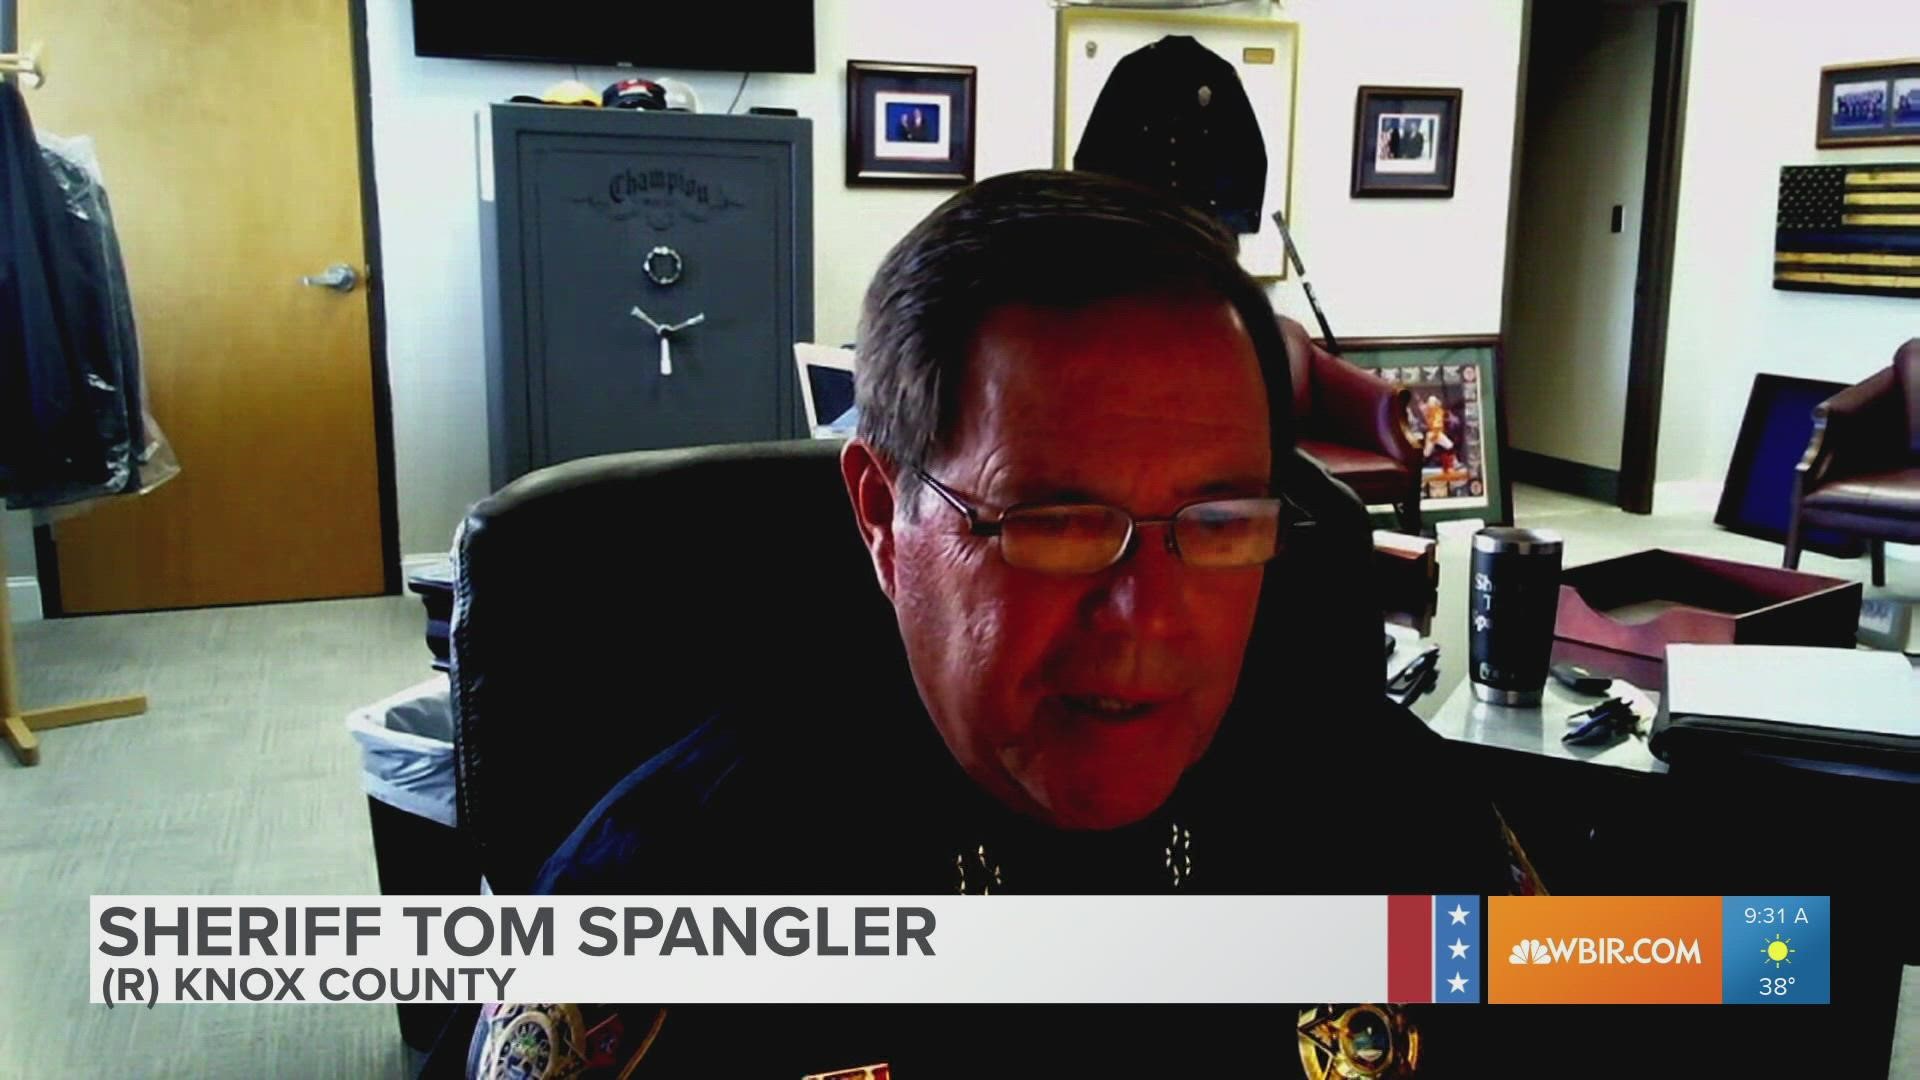 Sheriff's Office candidates Tom Spangler and Jimmy JJ Jones talk about their positions.